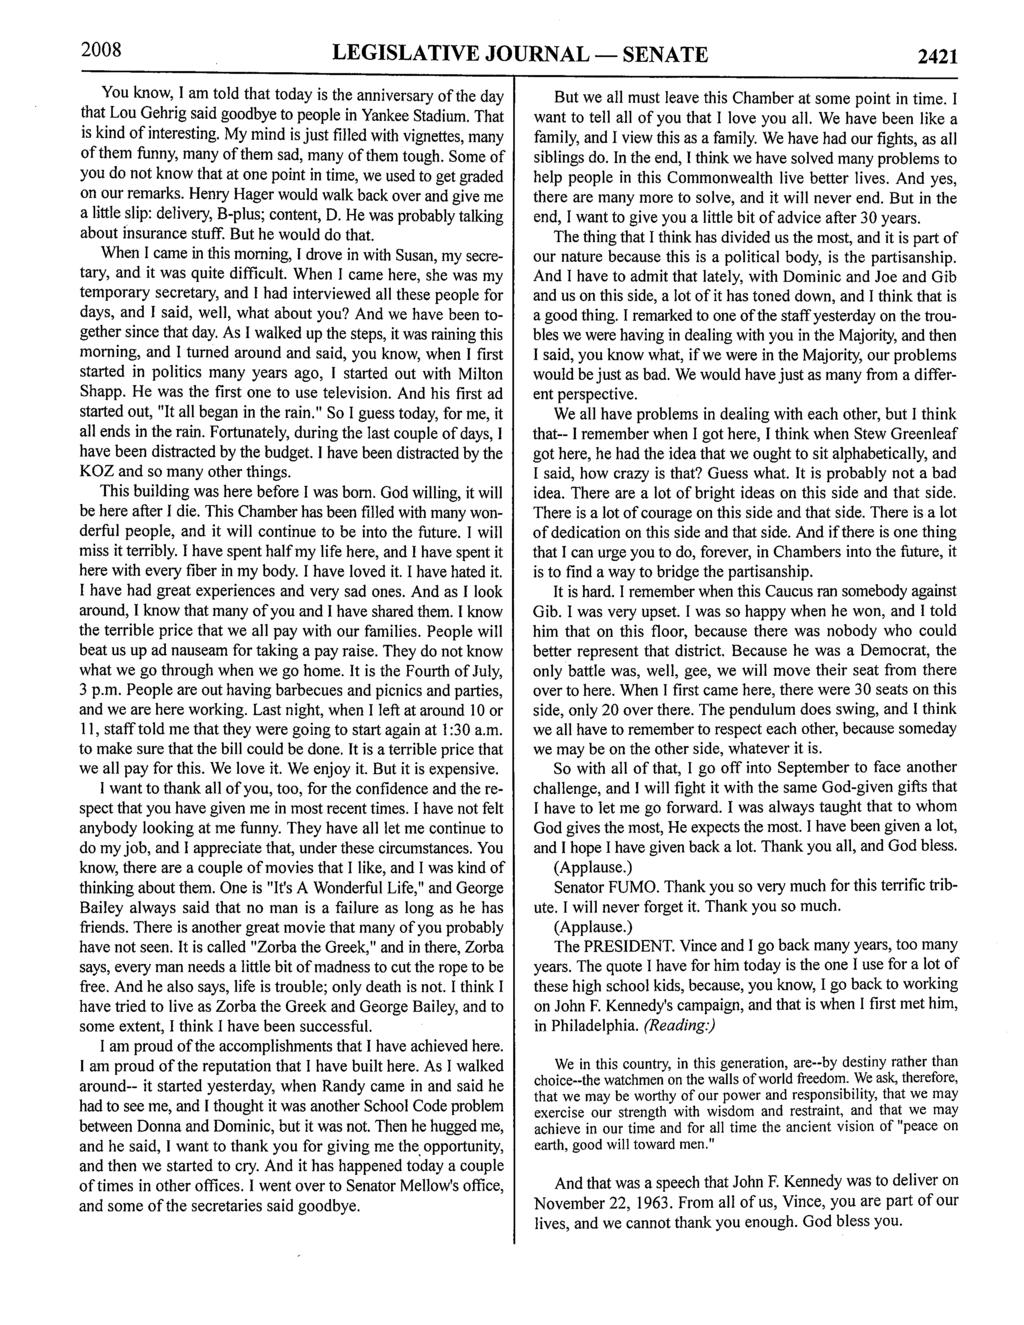 2008 LEGISLATIVE JOURNAL - SENATE 2421 You know, I am told that today is the anniversary of the day that Lou Gehrig said goodbye to people in Yankee Stadium. That is kind of interesting.